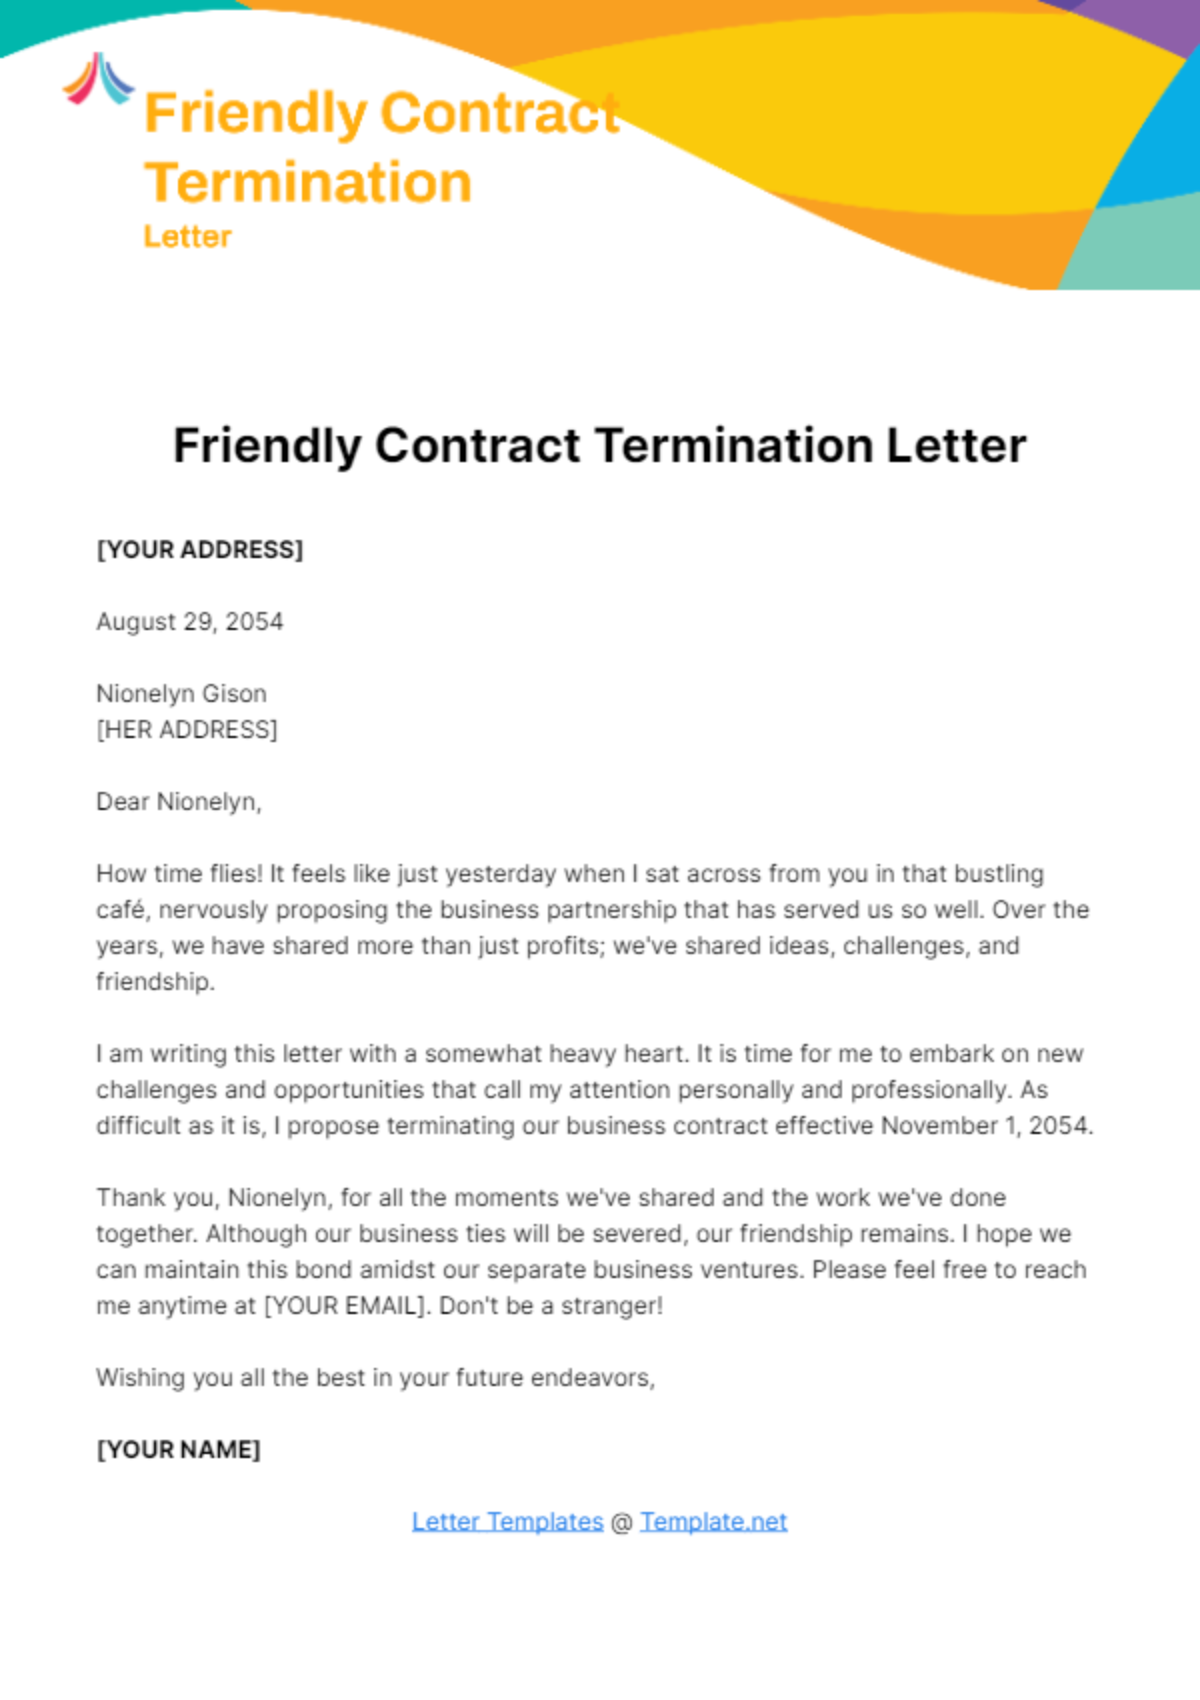 Free Friendly Contract Termination Letter Template